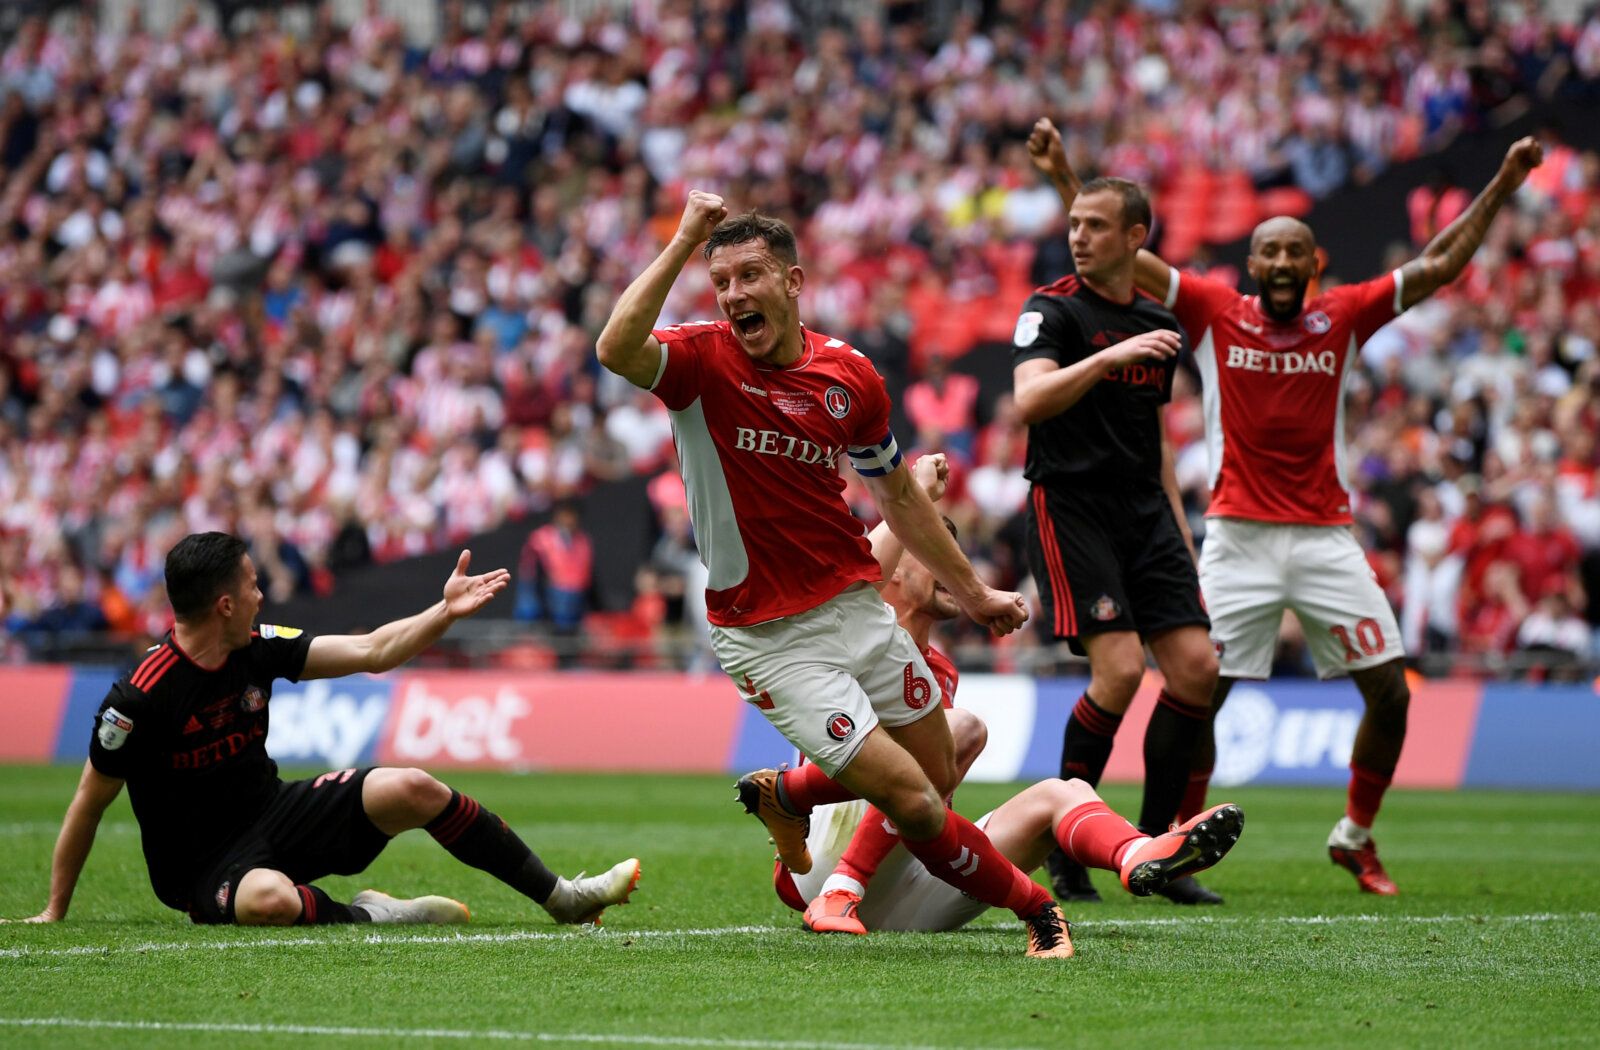 Soccer Football - League One Playoff Final - Sunderland v Charlton Athletic - Wembley Stadium, London, Britain - May 26, 2019  Charlton Athletic's Jason Pearce celebrates their second goal scored by Patrick Bauer   Action Images/Tony O'Brien  EDITORIAL USE ONLY. No use with unauthorized audio, video, data, fixture lists, club/league logos or 